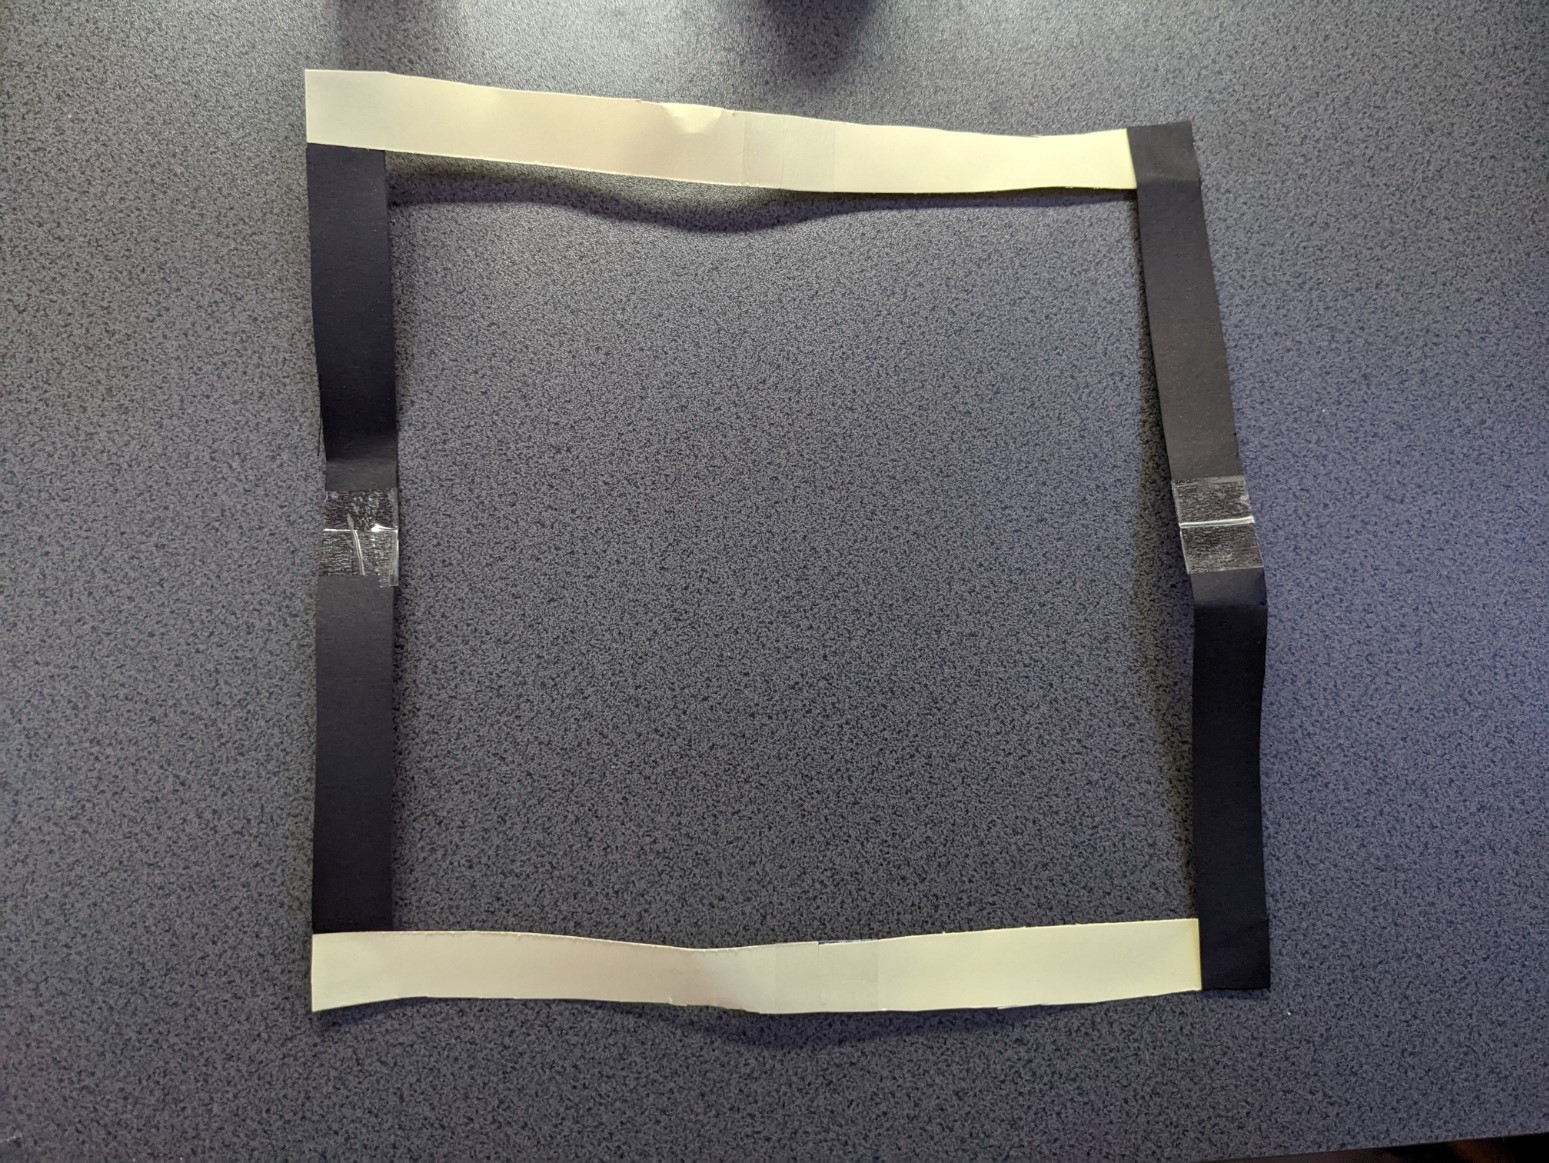 A square formed by following this challenge's instructions.